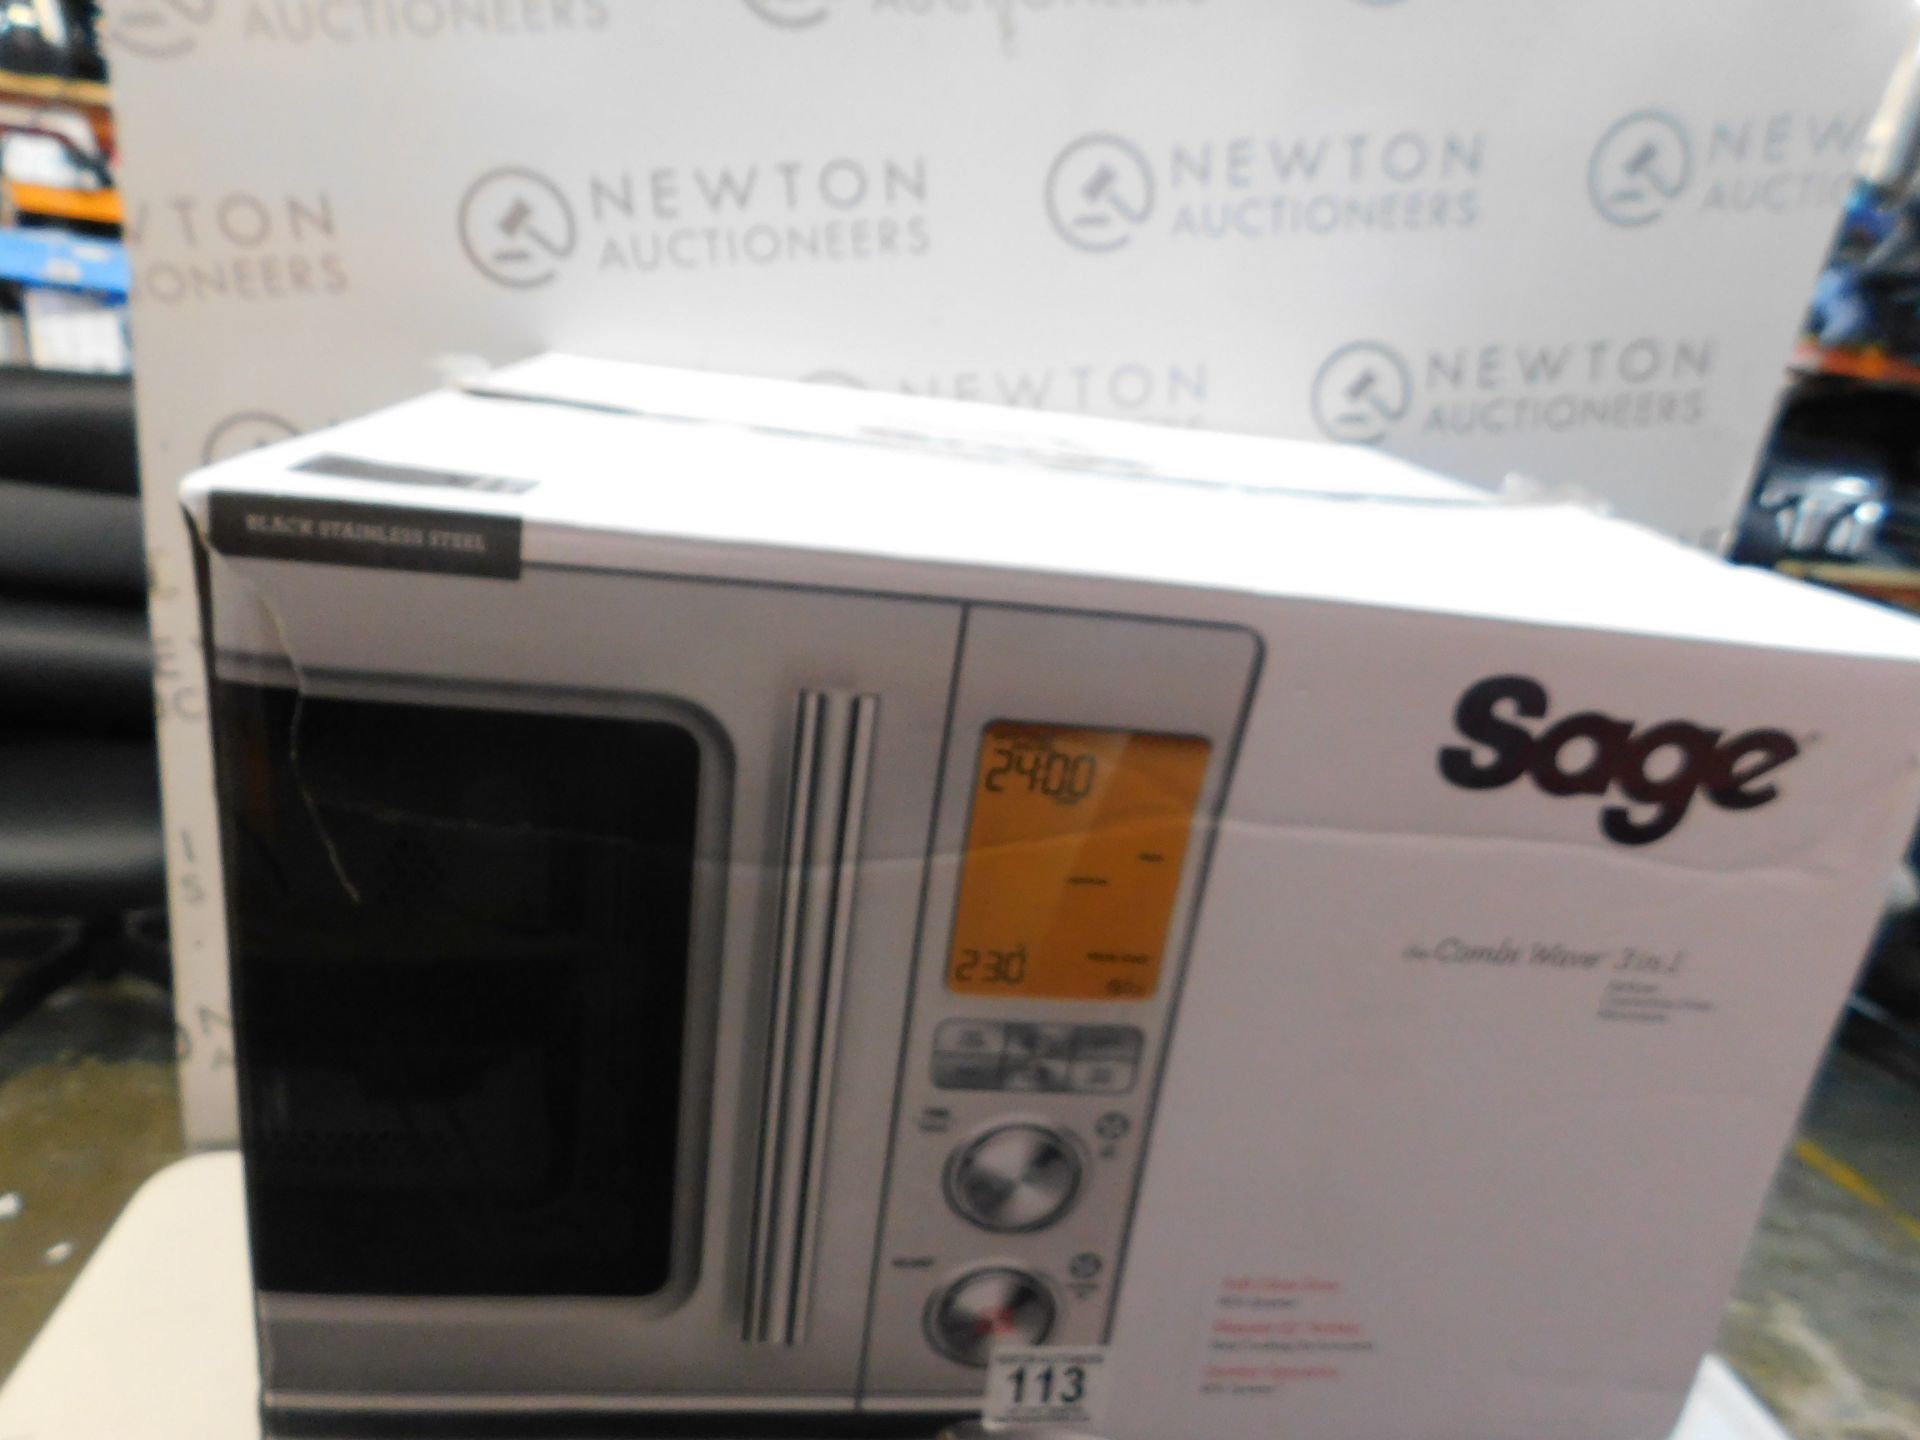 1 BOXED SAGE 32 LITRE 1100W THE COMBI WAVE 3 IN 1 MICROWAVE IN BLACK STAINLESS STEEL